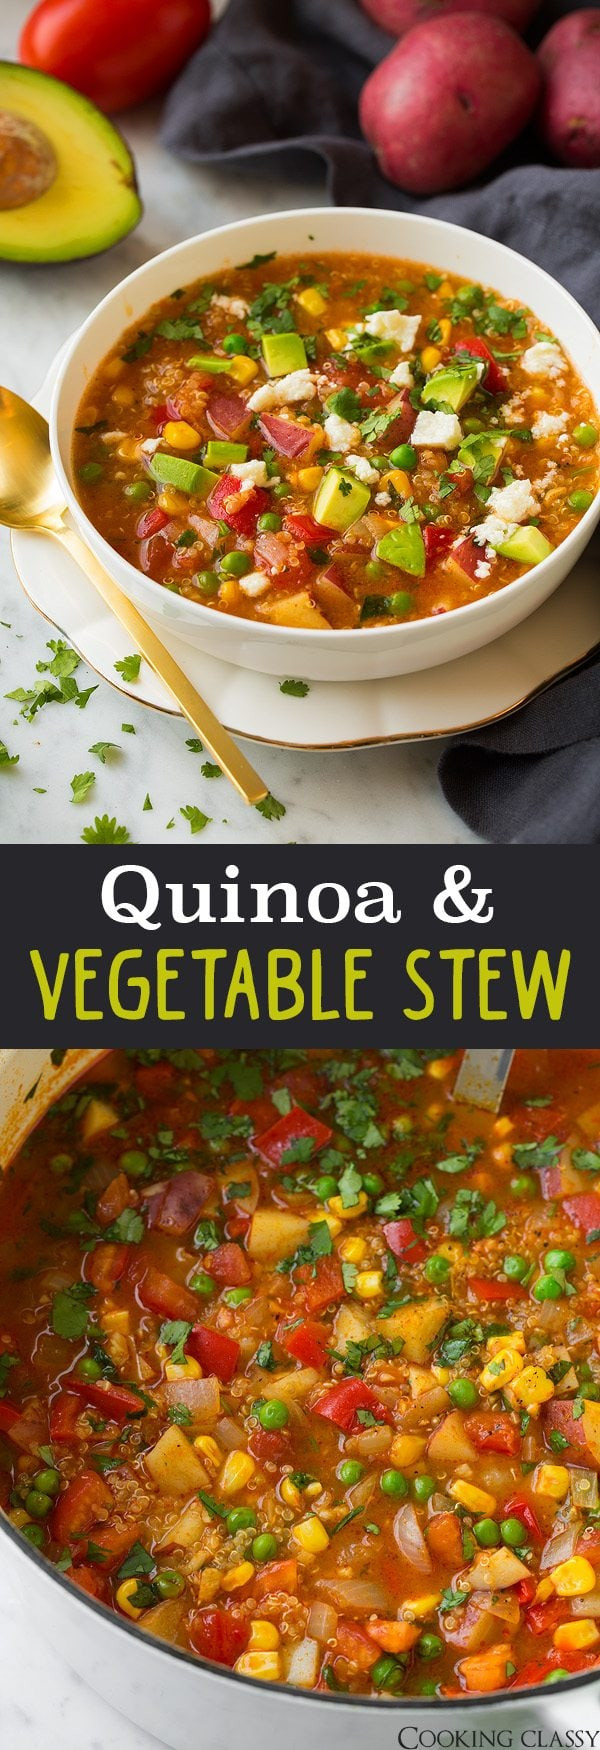 Quinoa And Vegetable Stew
 Quinoa and Ve able Stew Cooking Classy